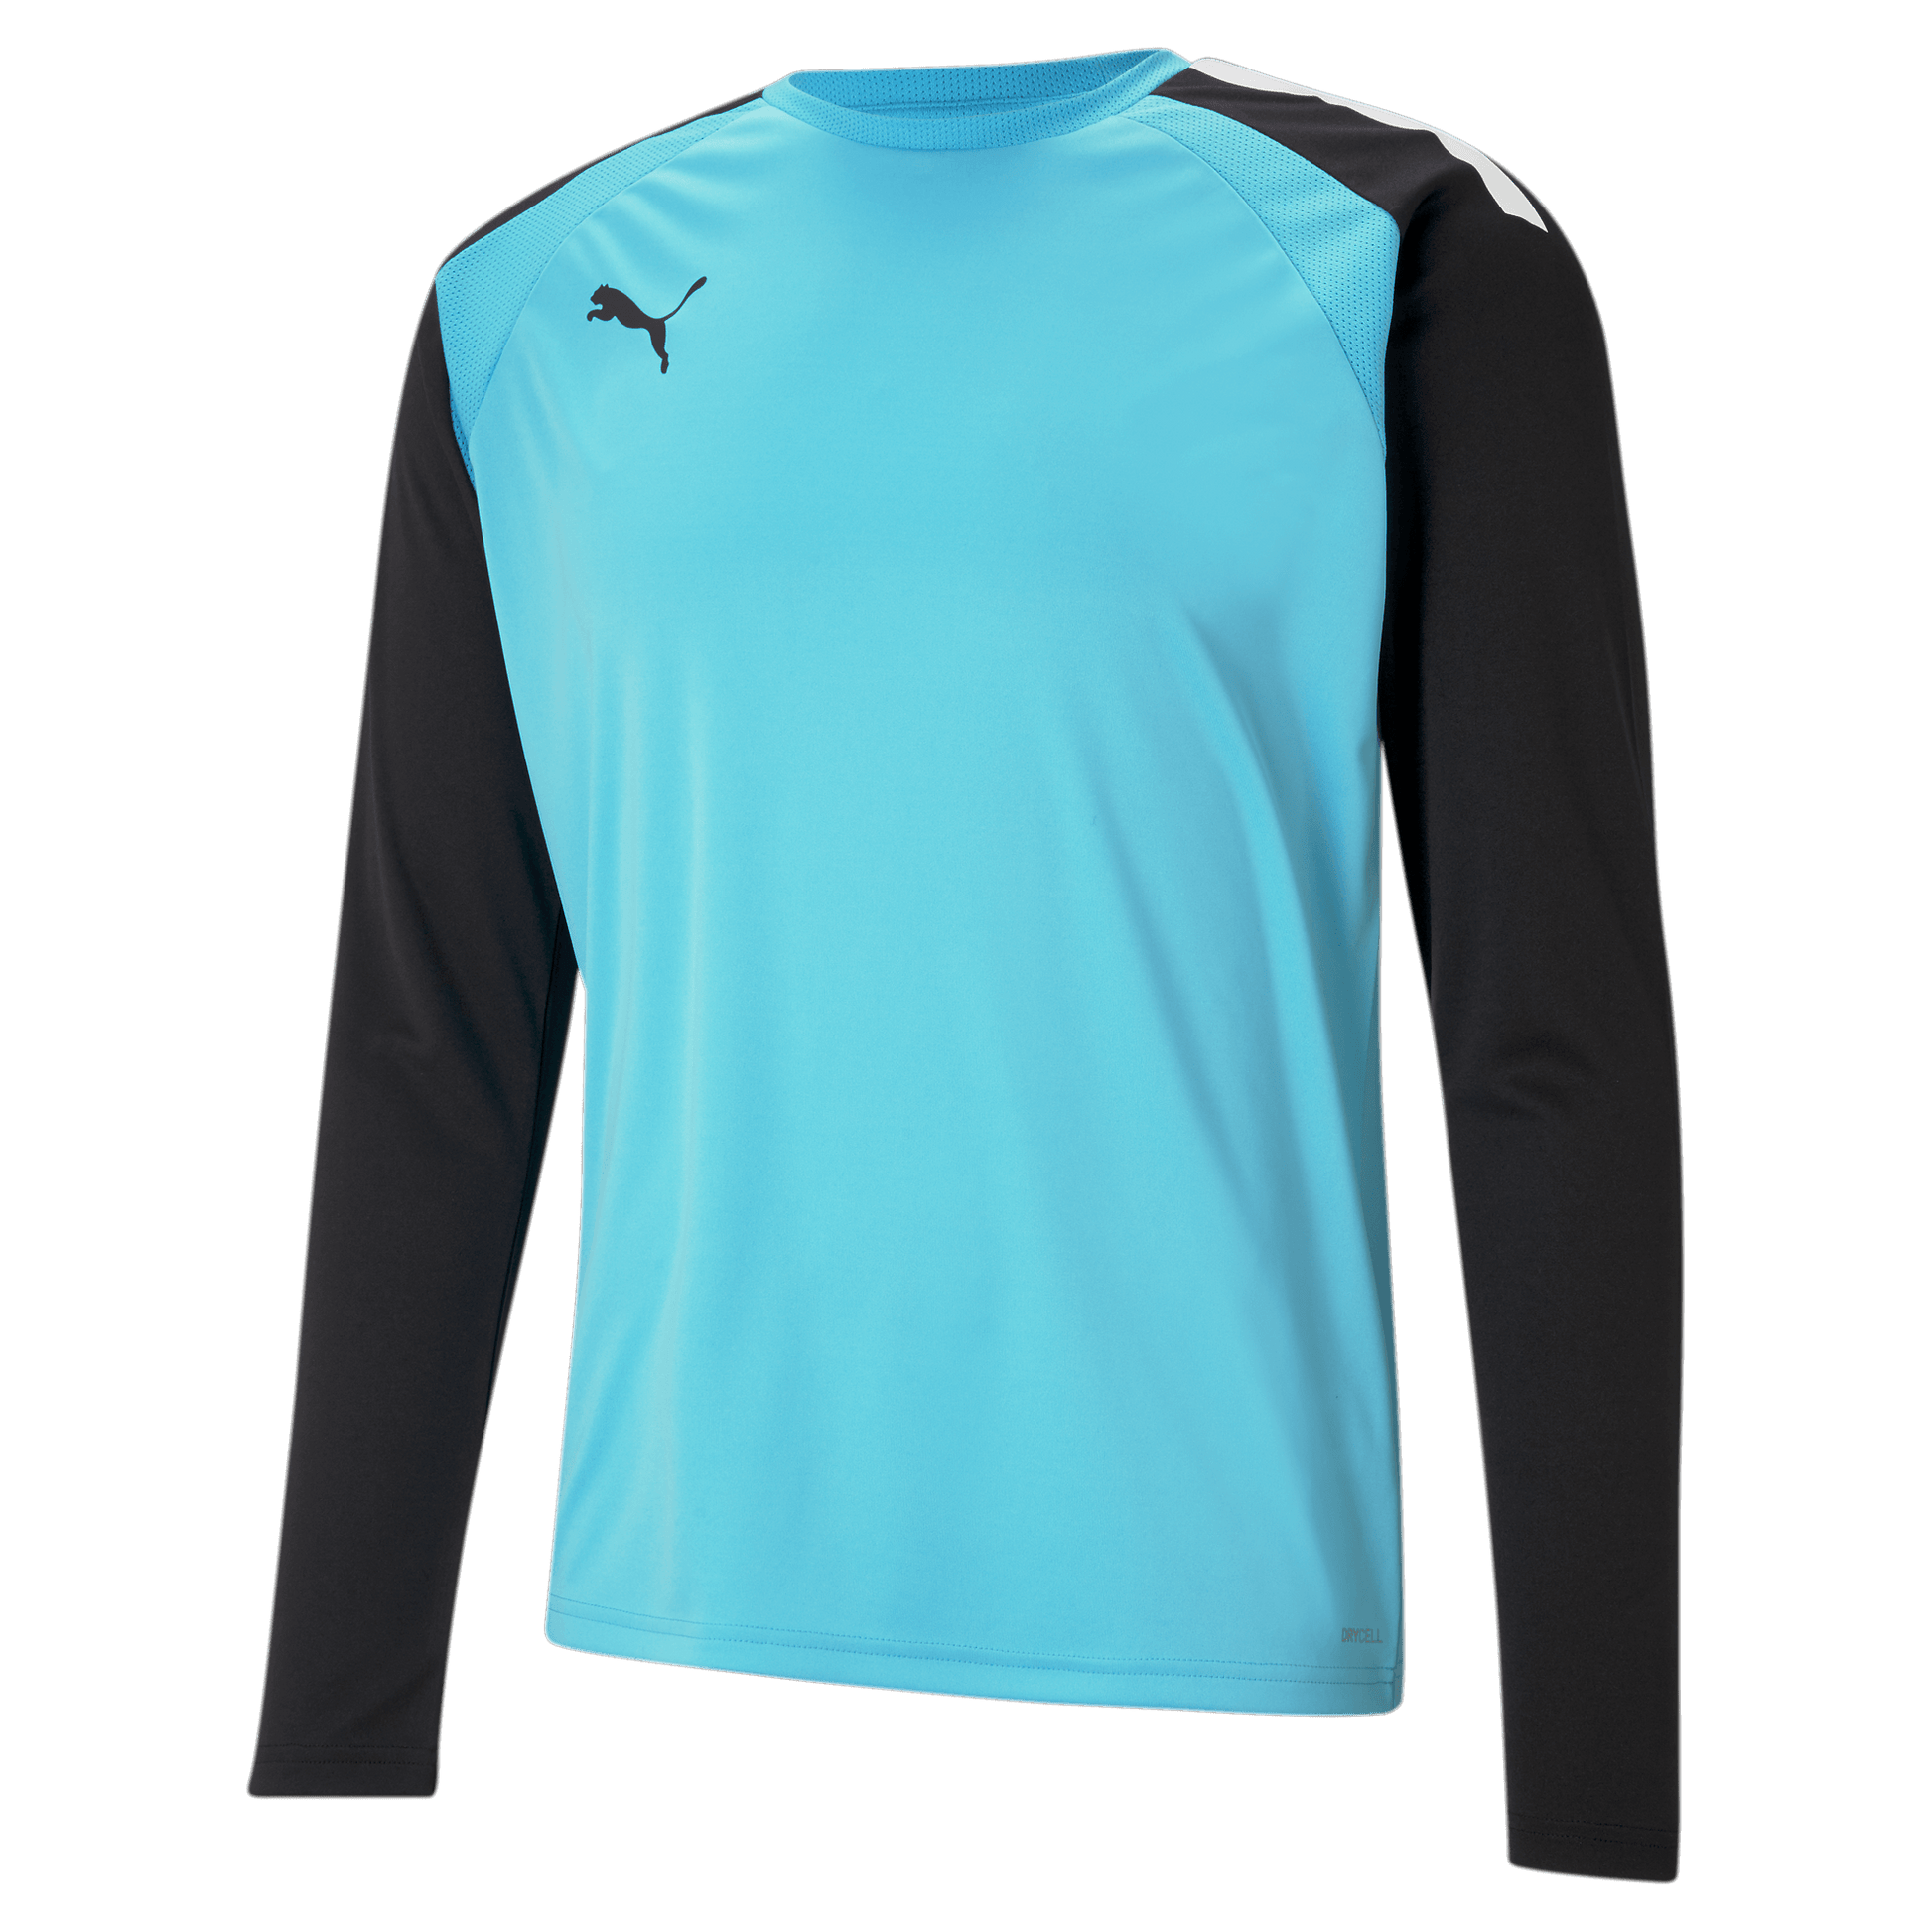 Puma YOUTH Team Pacer GK Jersey Blue Atoll-Black (Front)